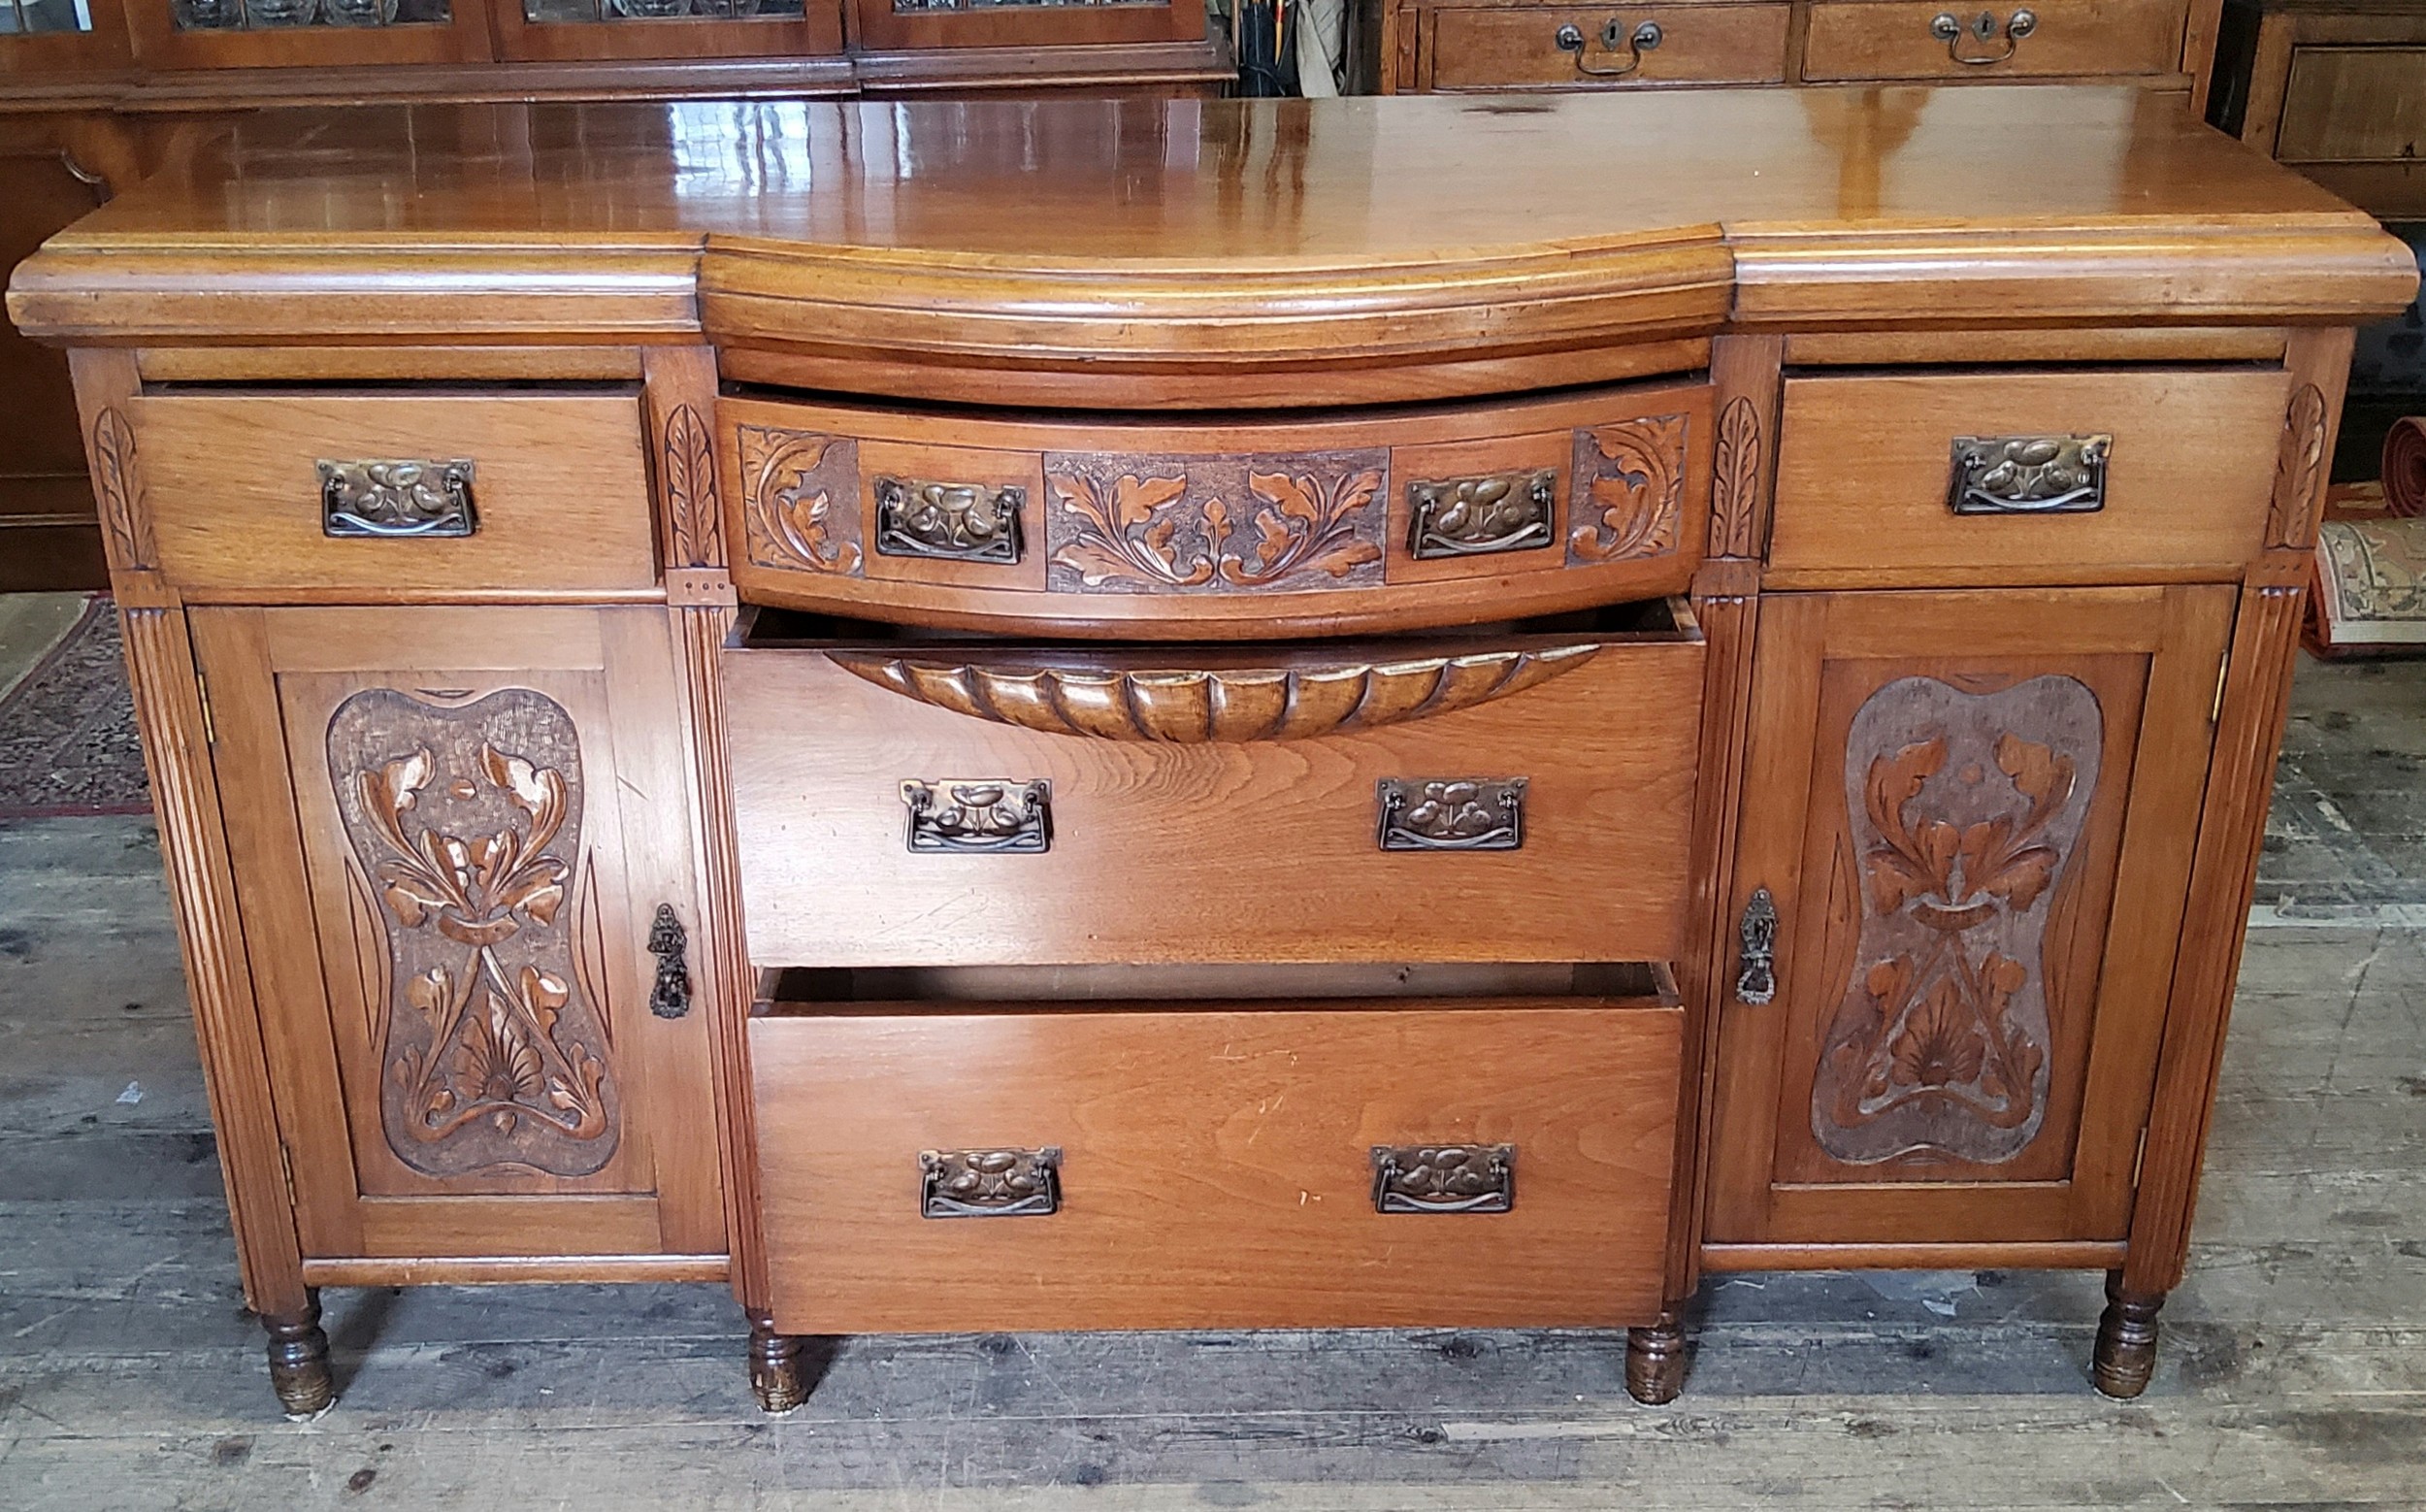 An early 20th century oak bow fronted breakfront sideboard with oversized Art Nouveau escutcheons - Image 4 of 4